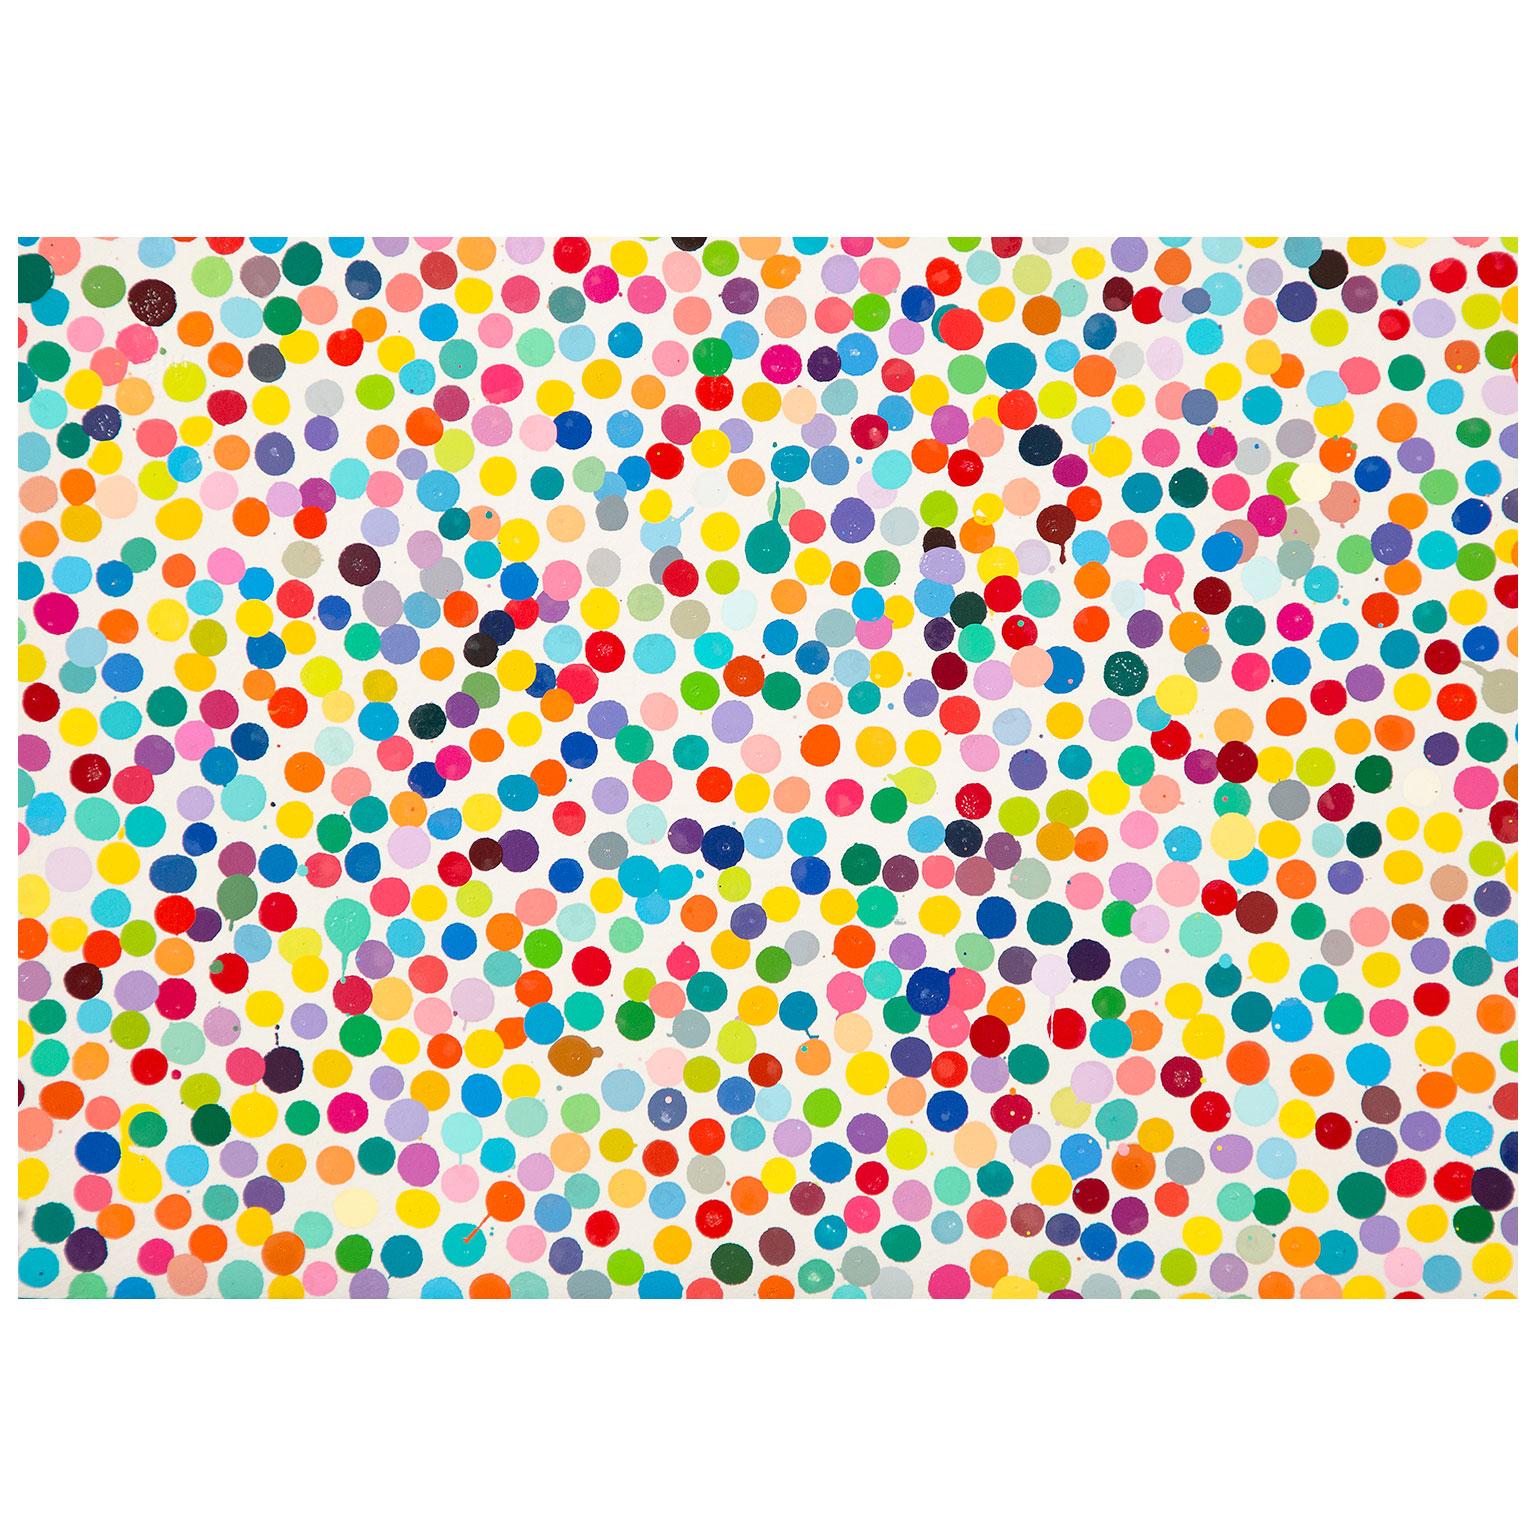 The Dead Priest  - Painting by Damien Hirst